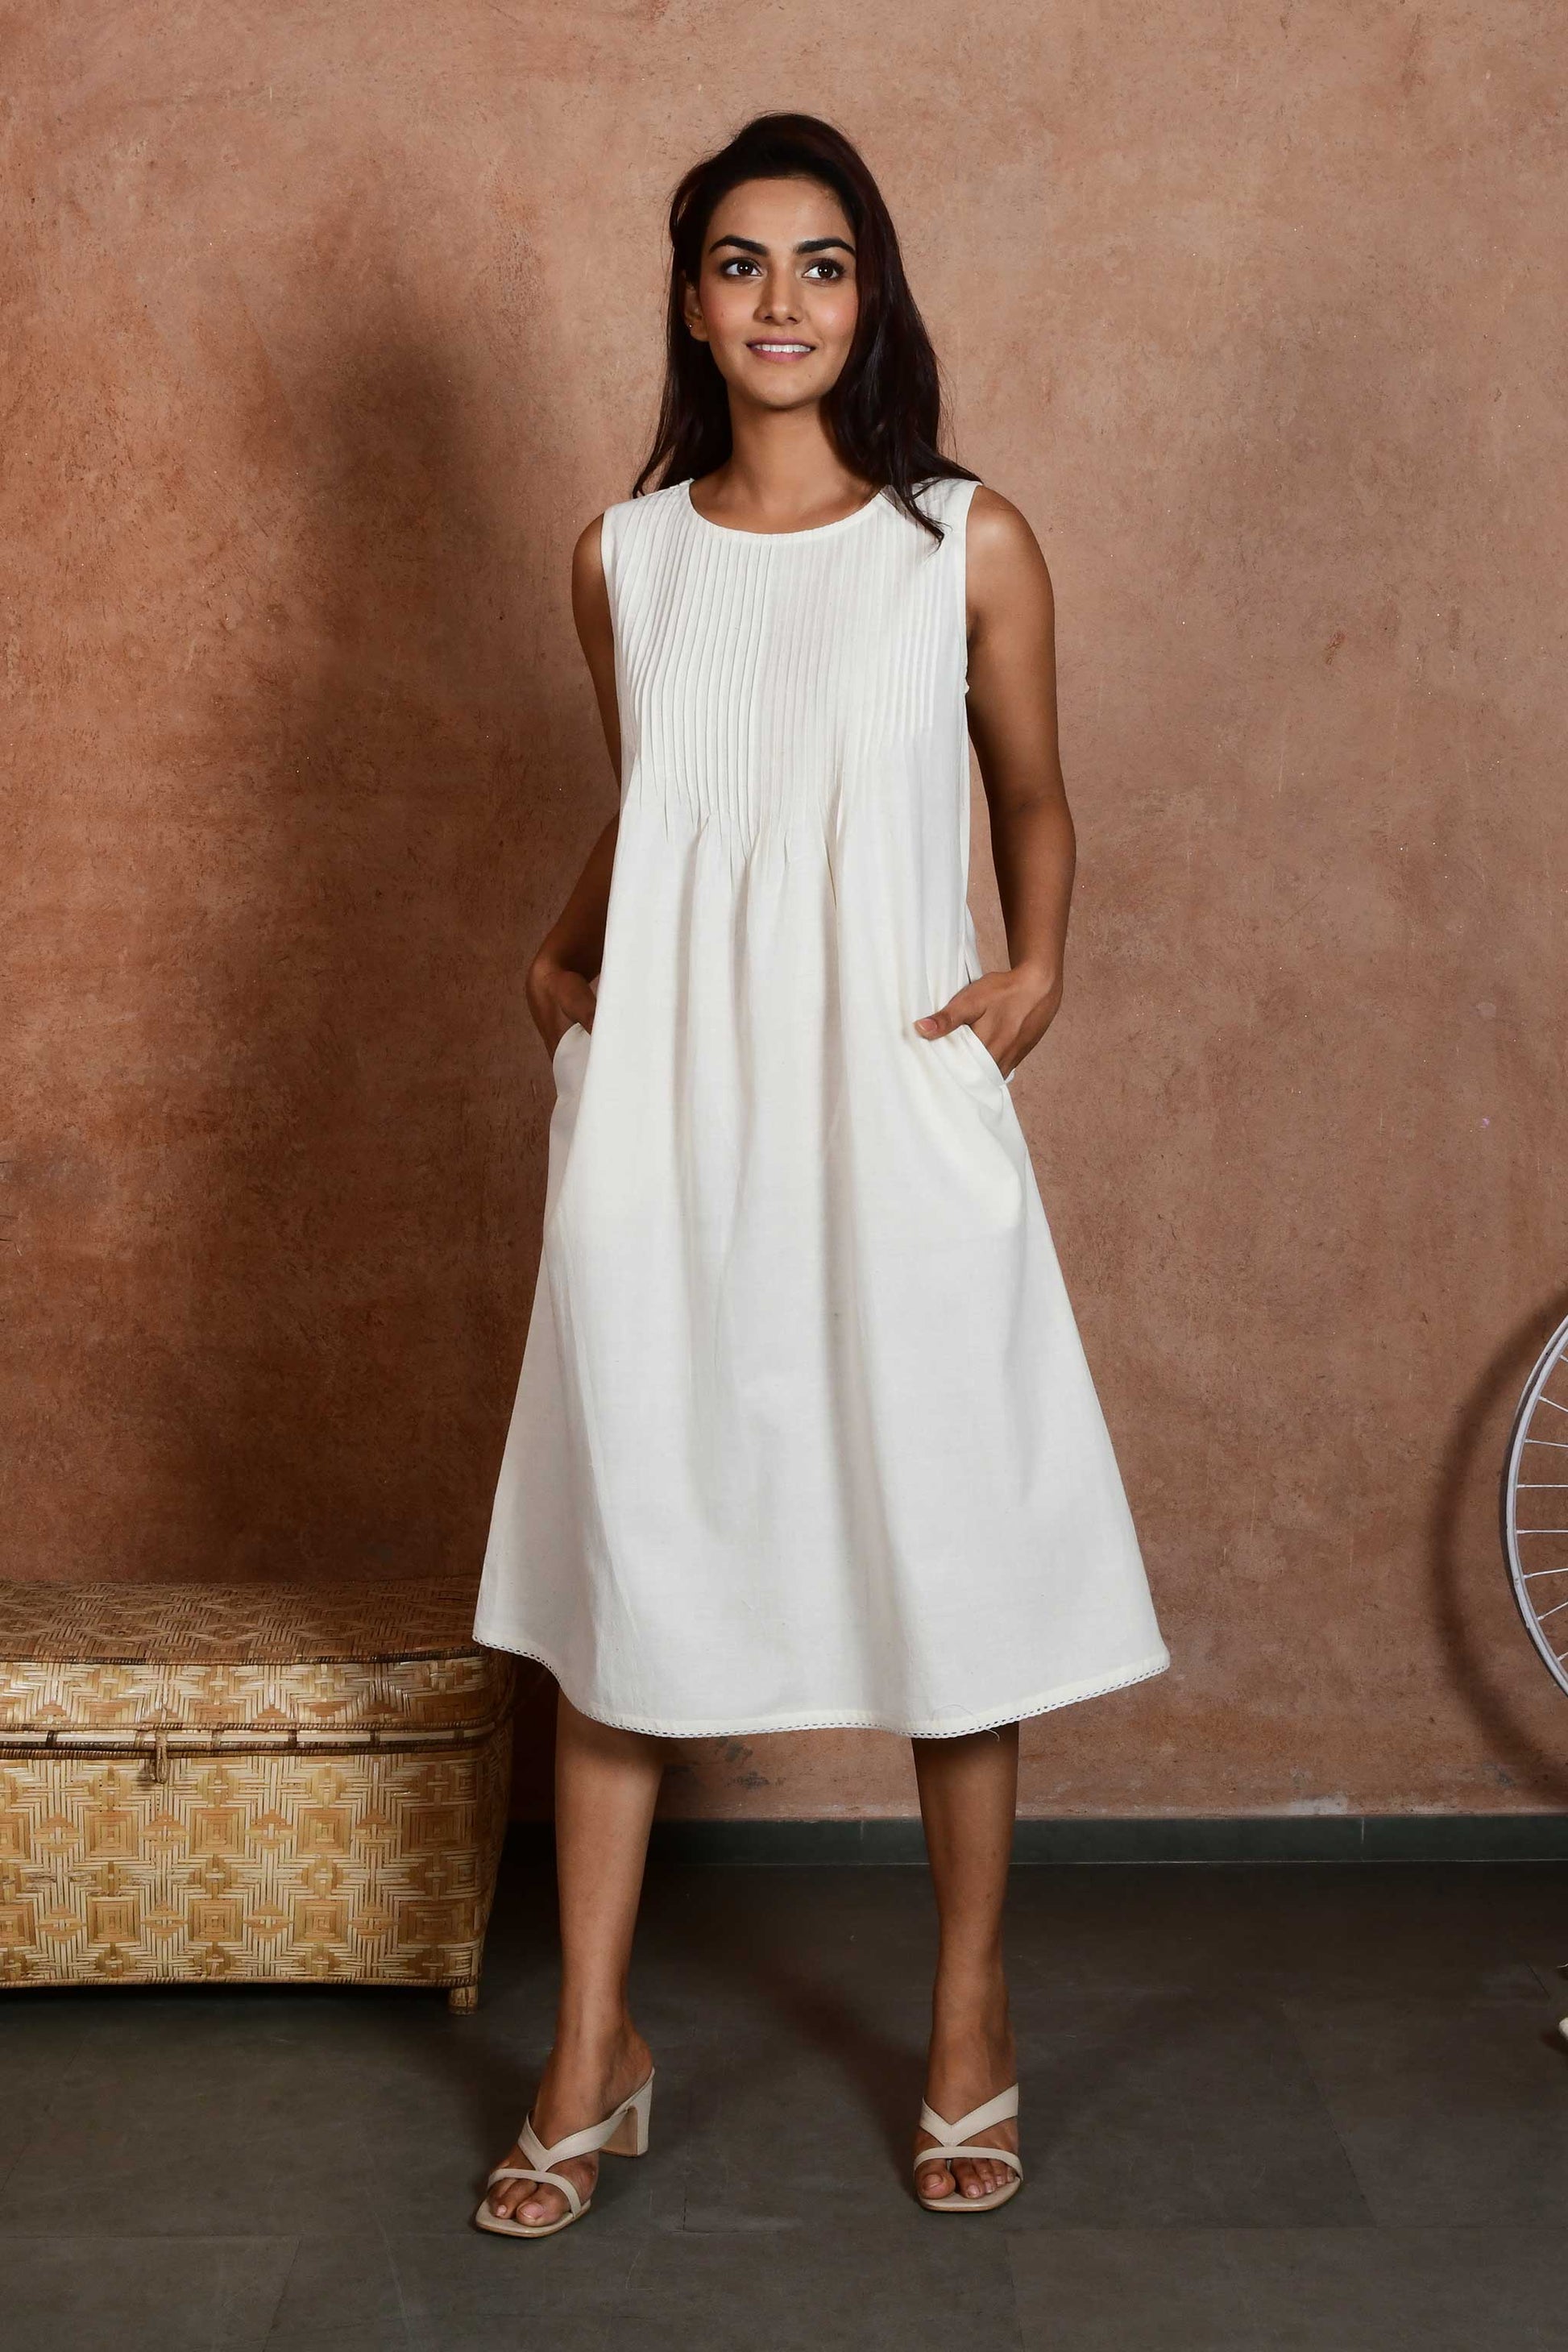 Front pose of a young indian model wearing an off white knee length a line dress with pleats till waist with hands in pockets.